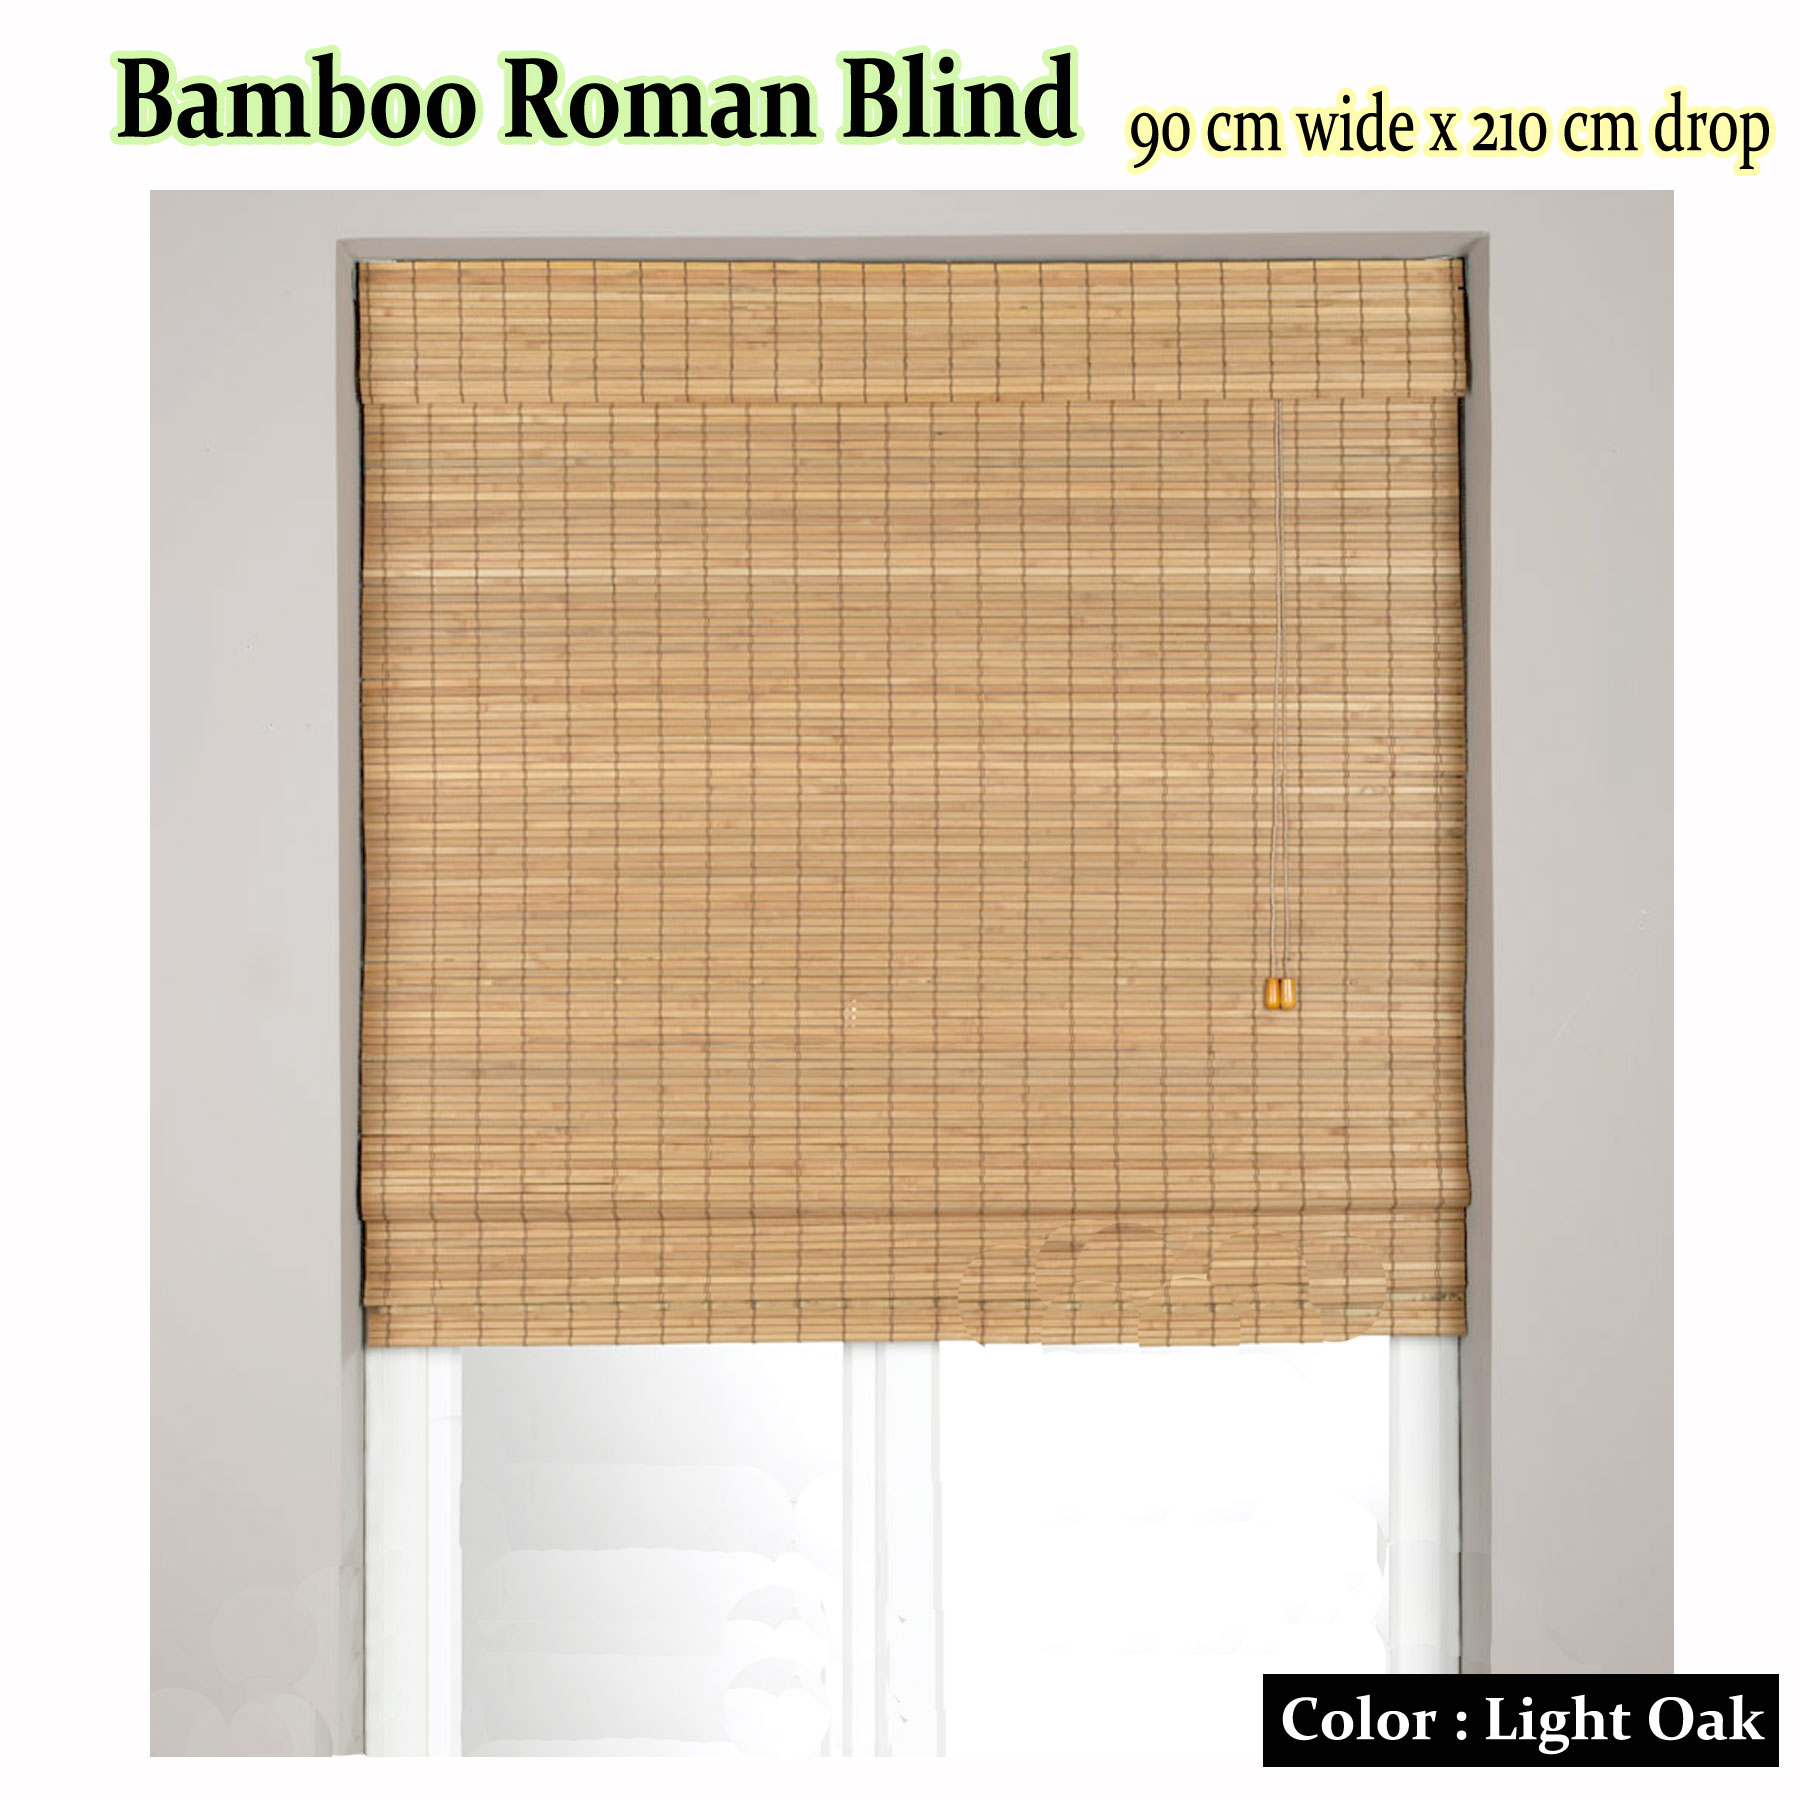 Bamboo Roman Shade with Fittings - 90x210cm Light Oak by Caprice - FREE POST